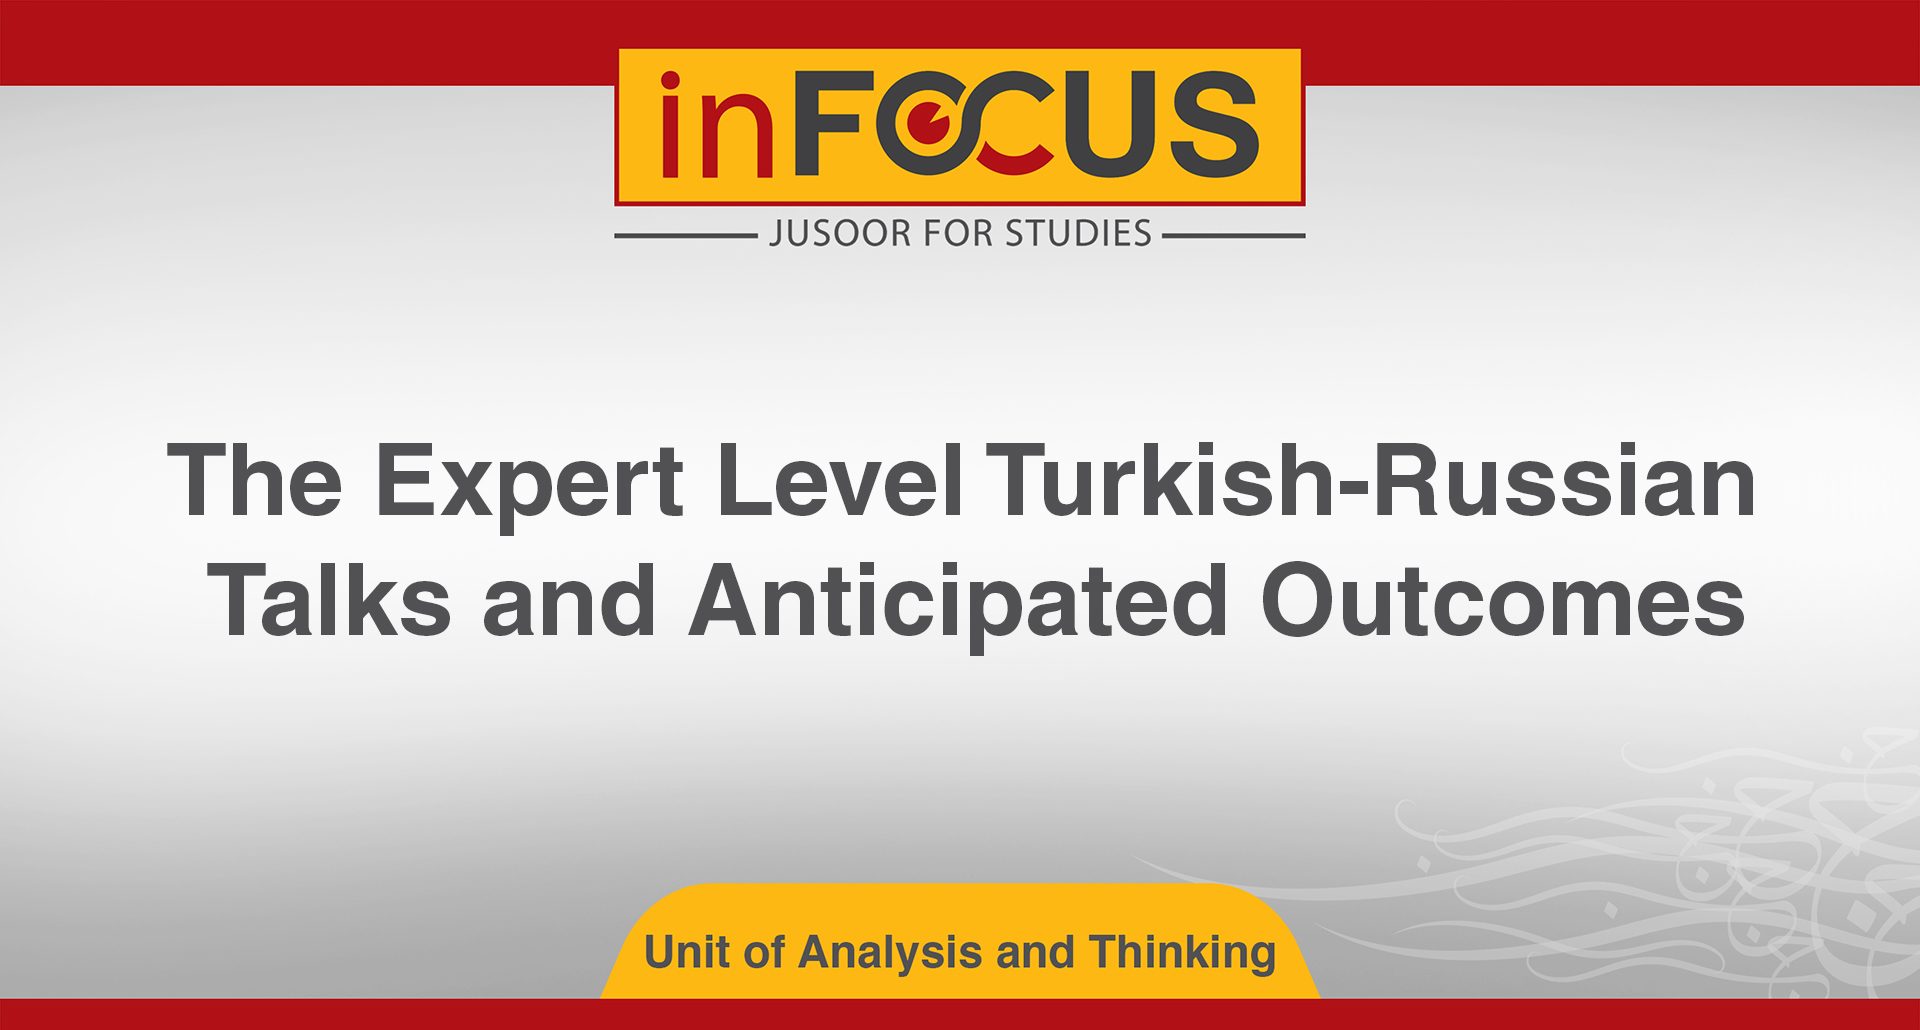 The Expert Level Turkish-Russian Talks and Anticipated Outcomes